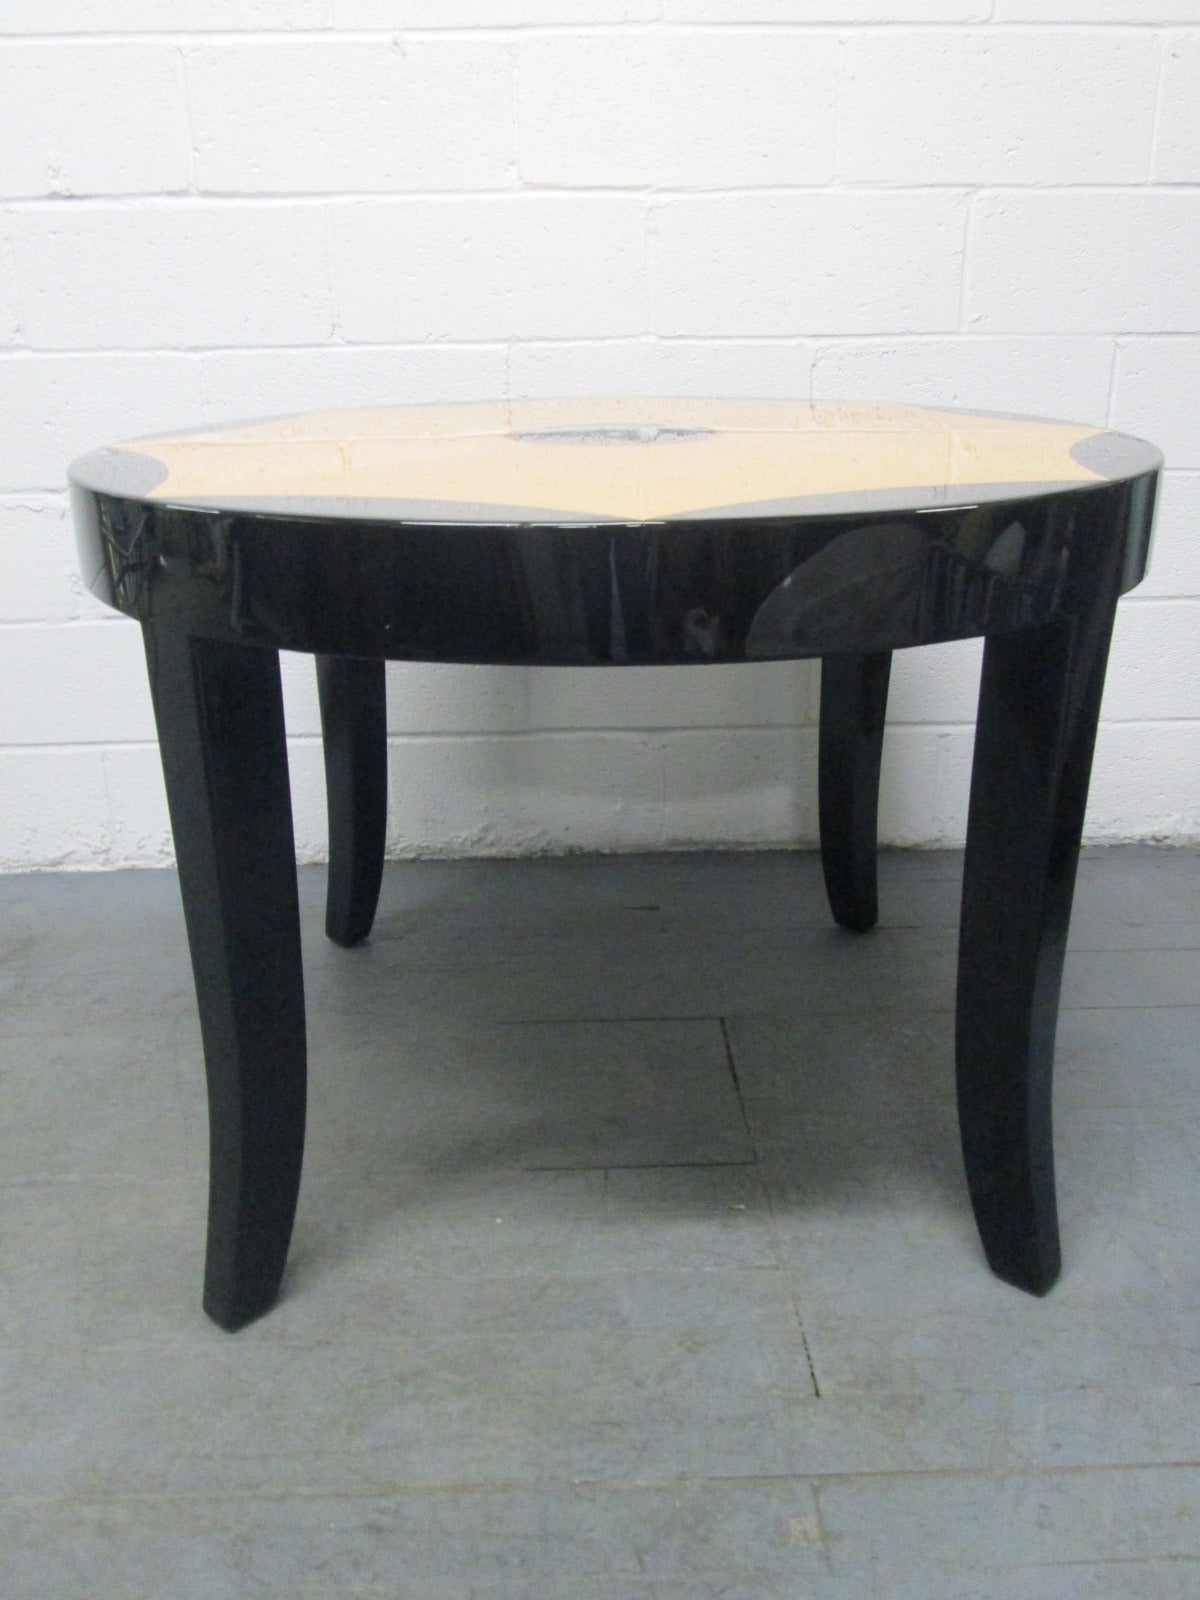 Black lacquered table with a high gloss finish with curly maple inlay. Can be used as a dining or center table.